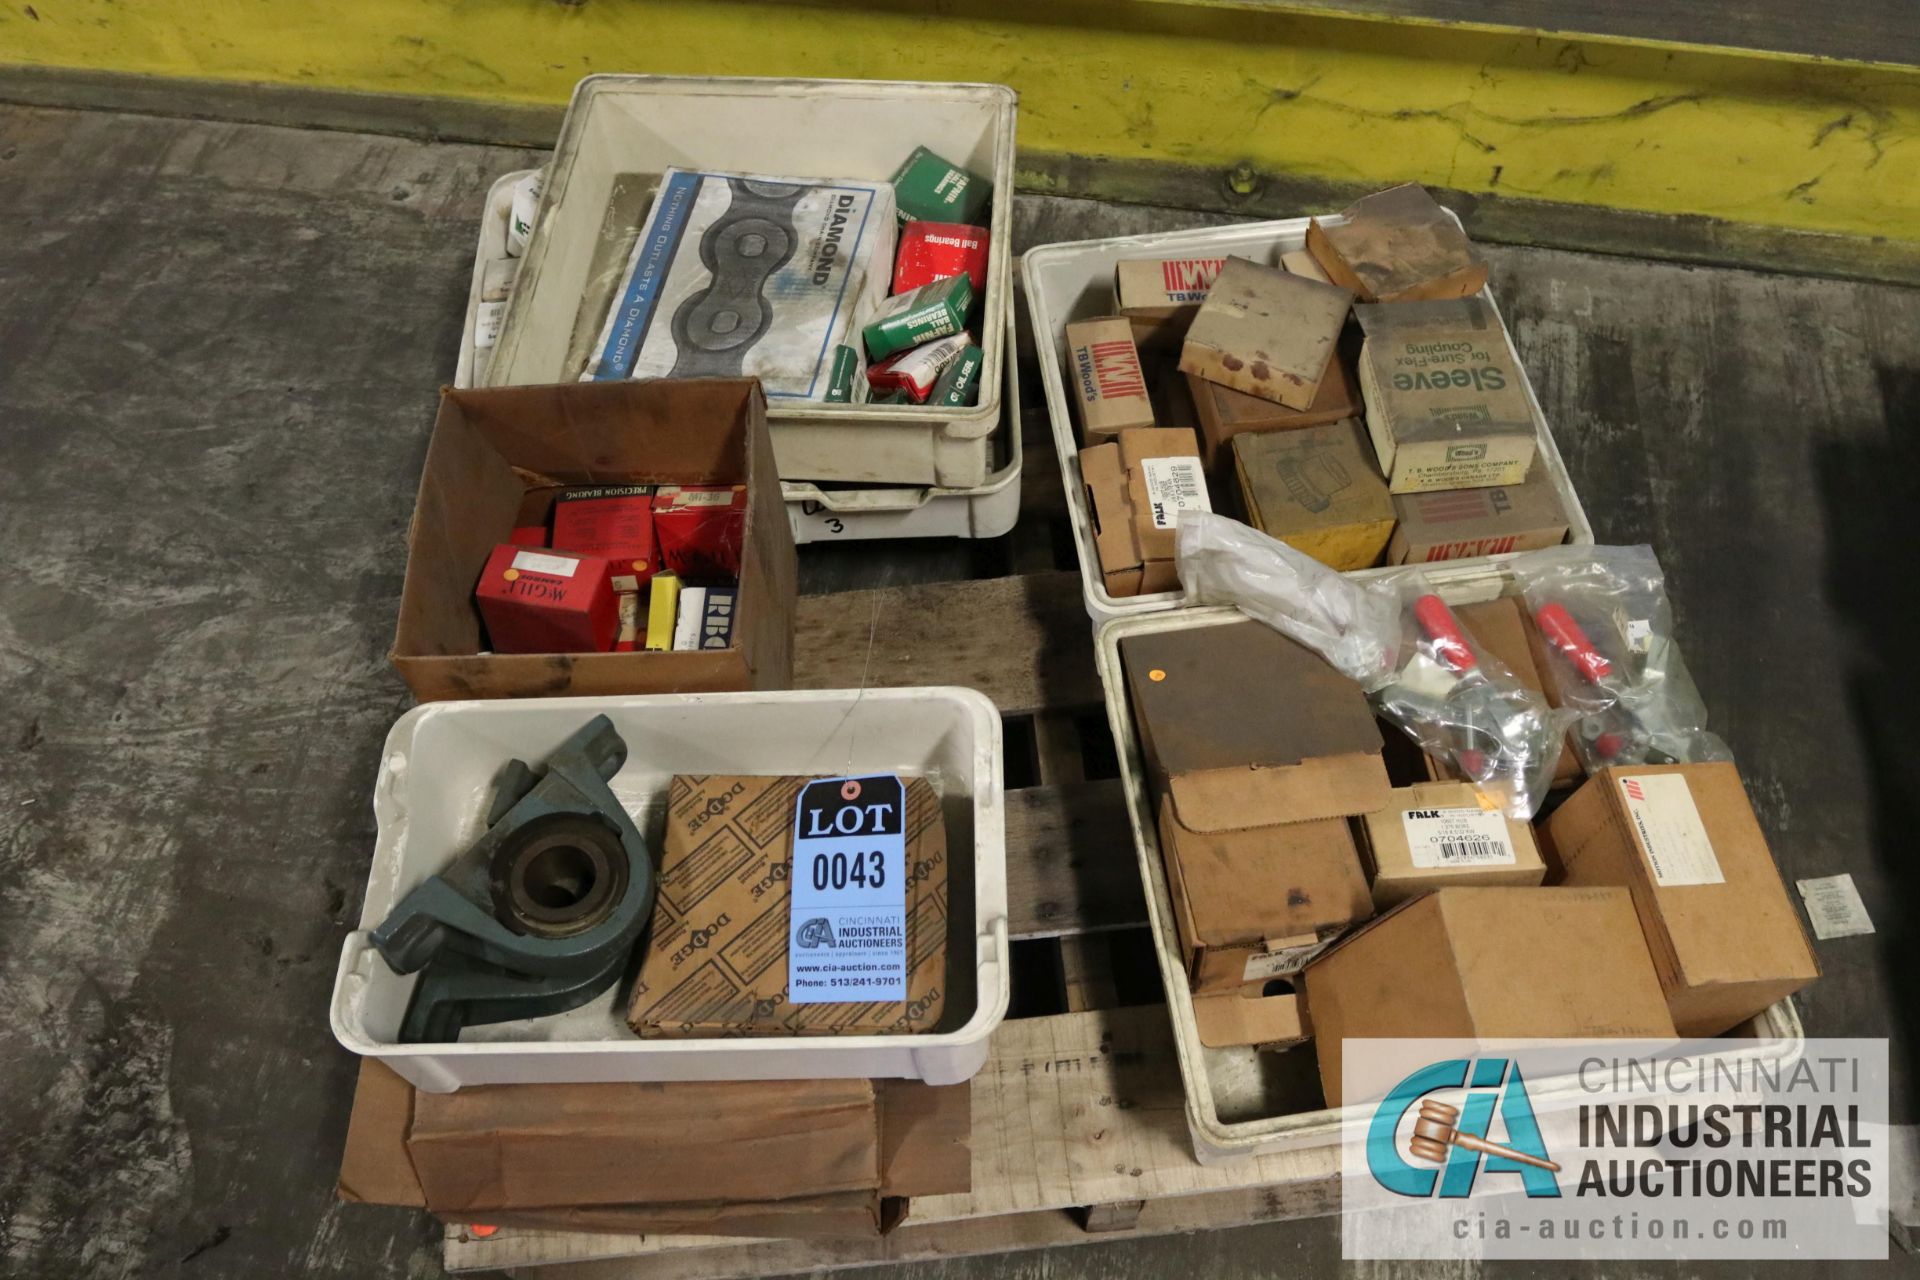 PALLET OF NOS BEARINGS & PARTS - $10.00 Rigging Fee Due to Onsite Rigger - Located in Bryan, Ohio